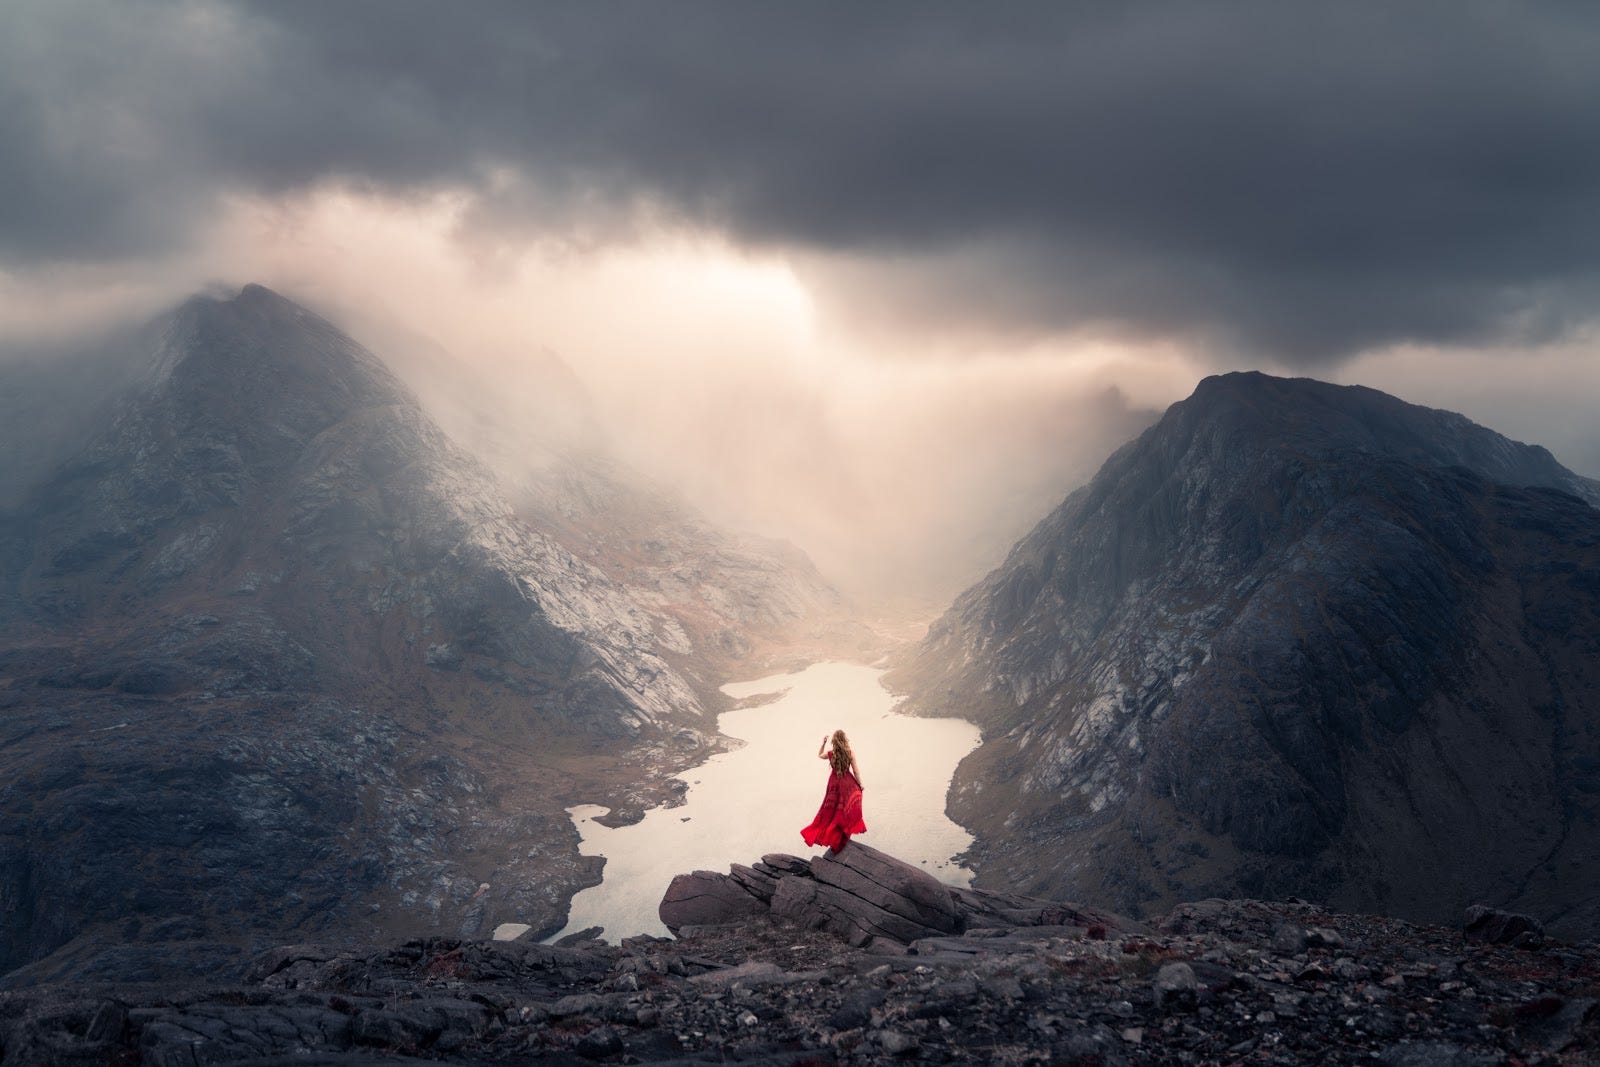 Woman in a red dress standing on a cliff overlooking a cloudy valley in Scotland.